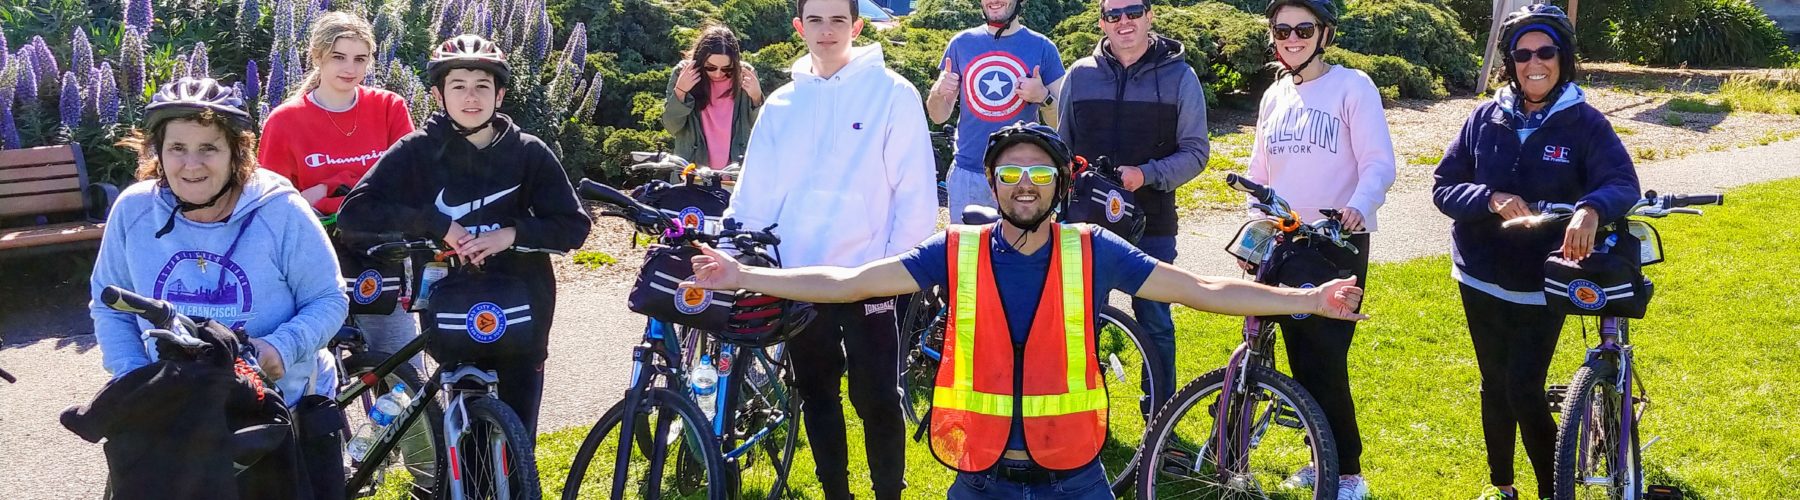 student group activities in san francisco with bay city bike